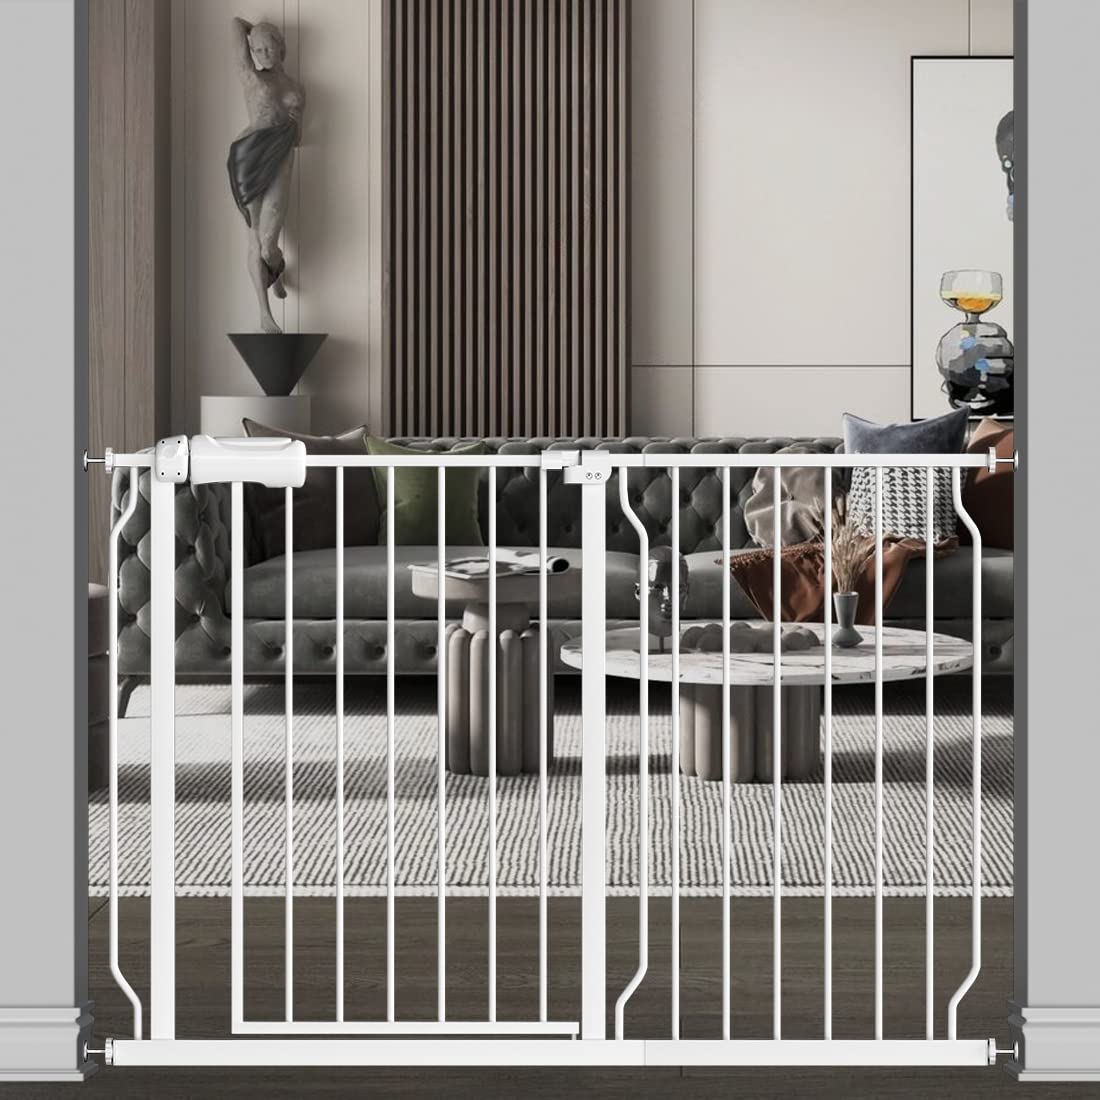 TSAYAWA Baby Gate Extra Wide With Door -Walk Through Presure Mounted Child Gates For Stair Doorway - Indoor Outdoor Safty Gate For Toddl